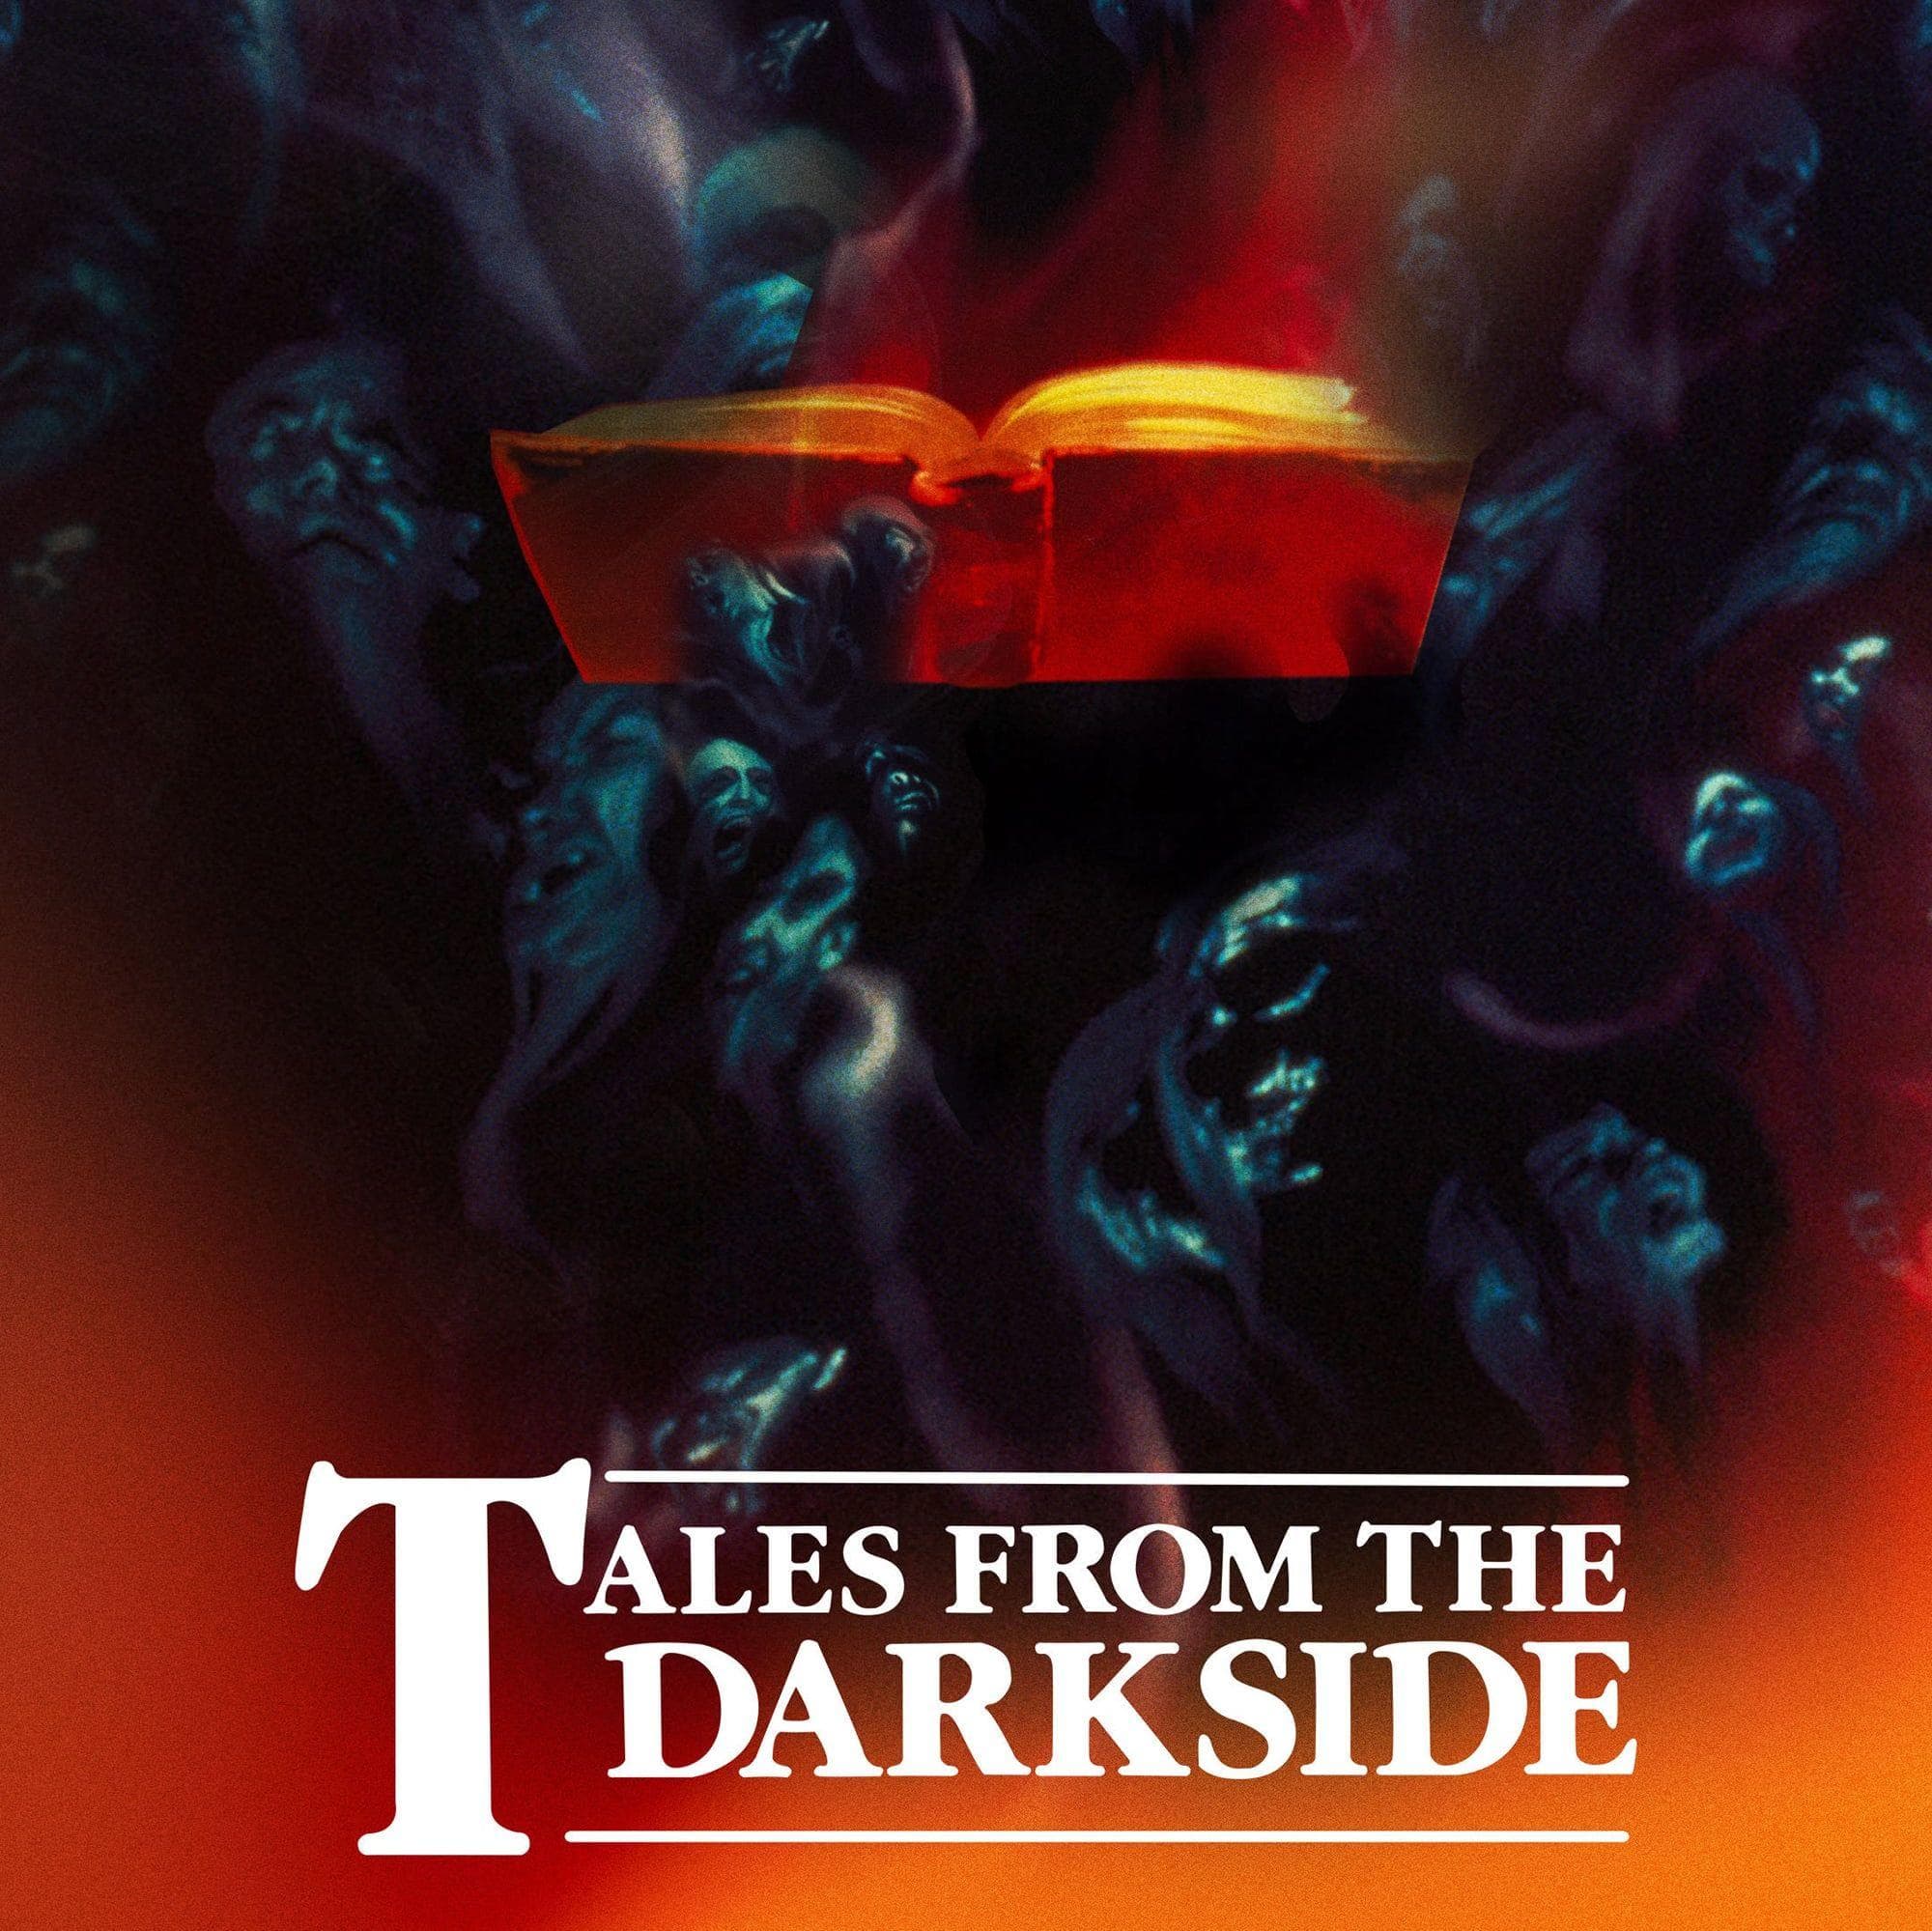 download the dark pictures anthology series for free